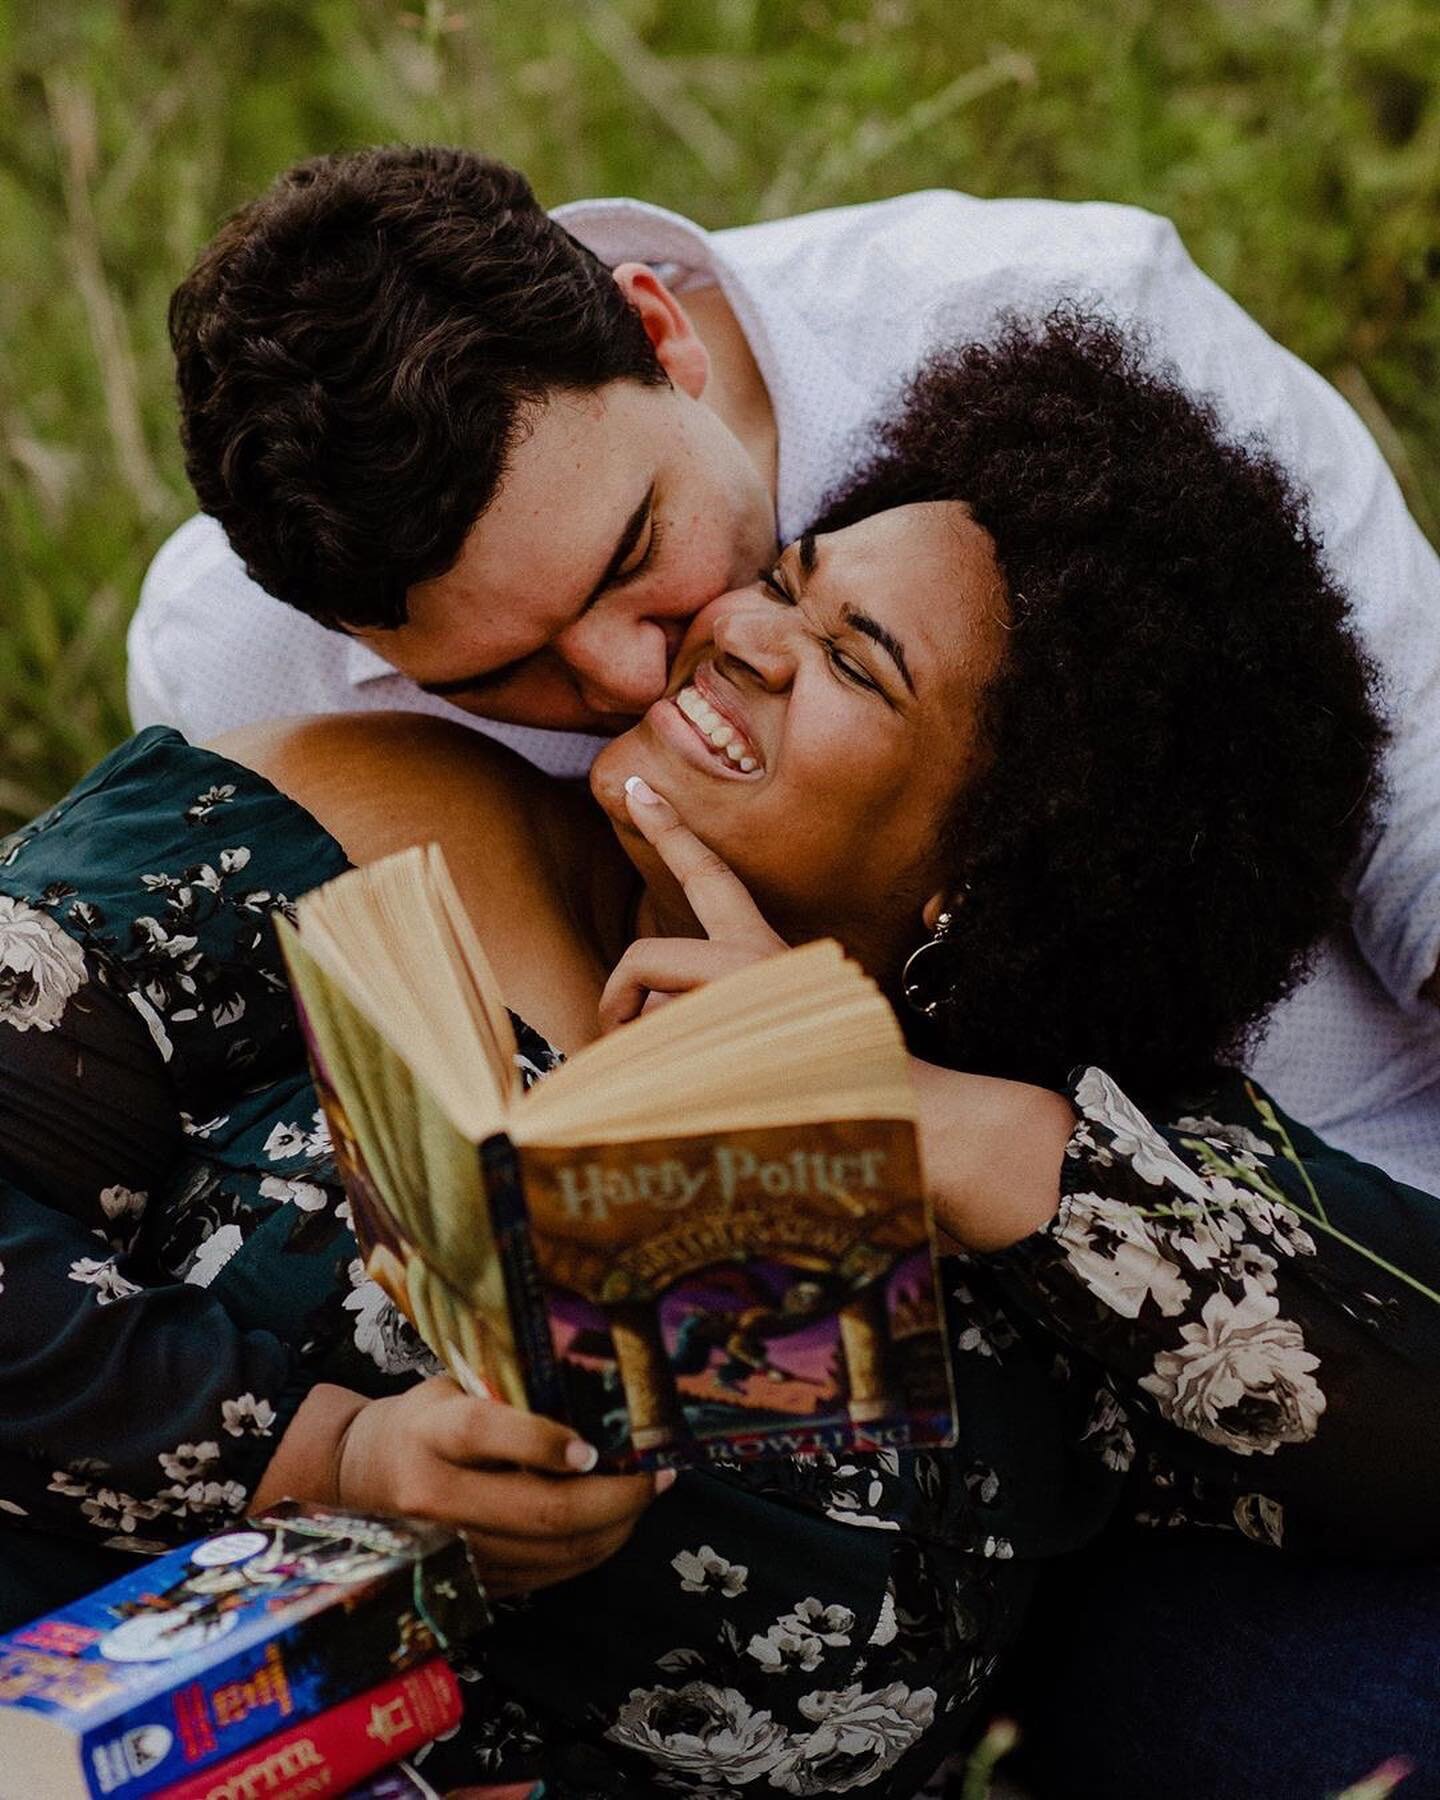 Spending tonight with a good book and the most adorable engagement shoot. Congratulations @whitswellnessjourney and Caleb on your big day!! 📚⚡️
📸: @reginathephotographer